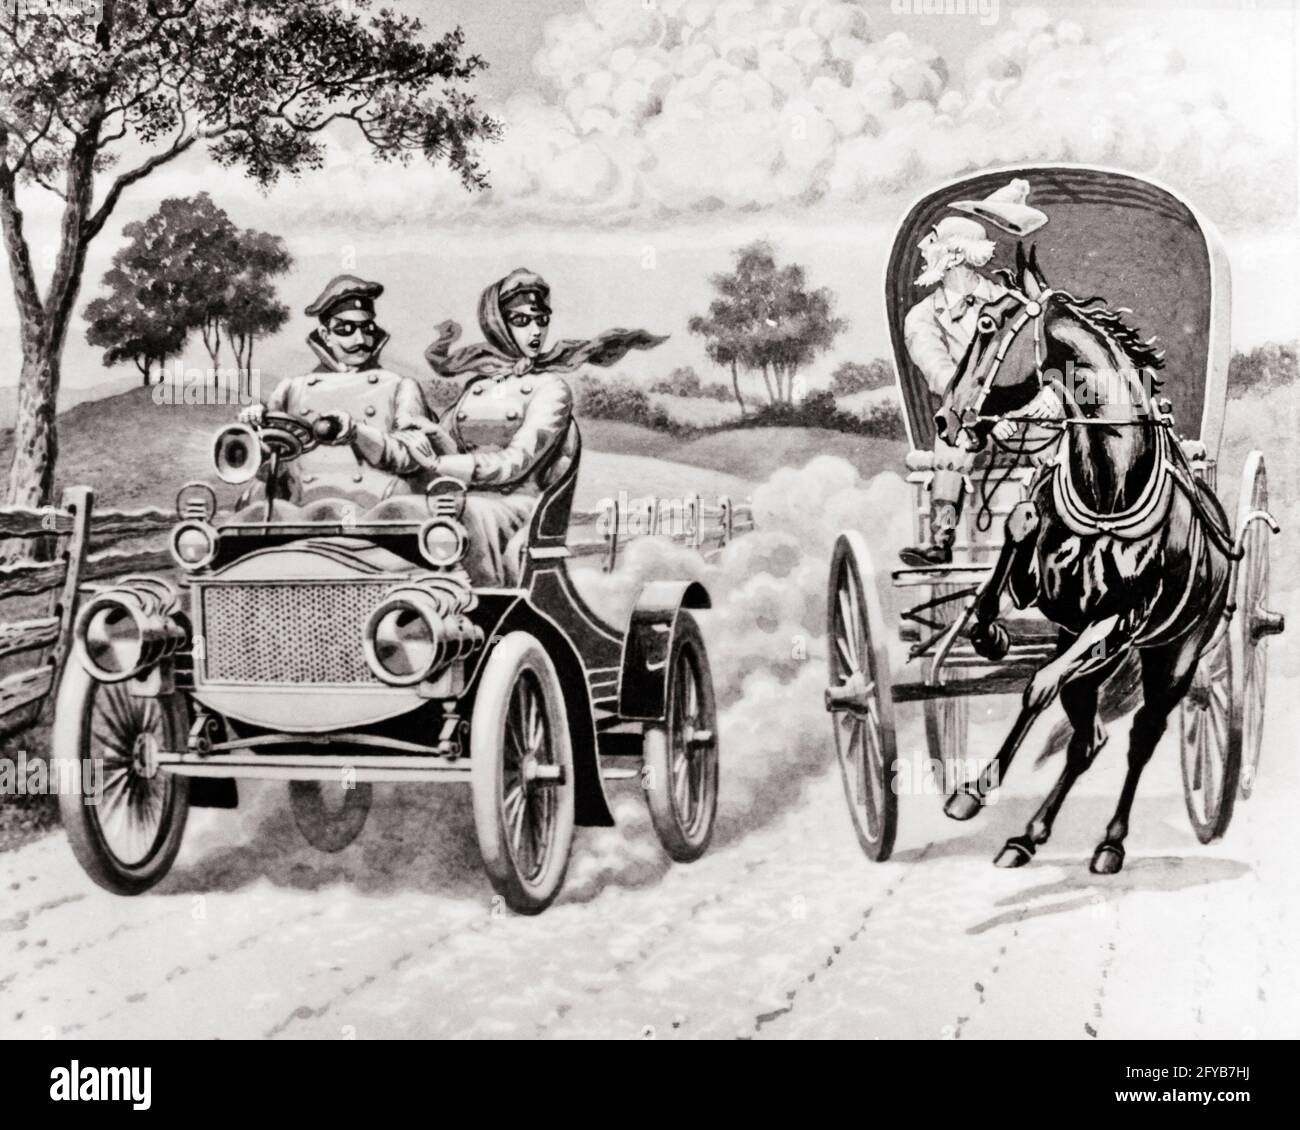 1890s-1900s-1910s-couple-man-woman-in-horseless-carriage-automobile-speeding-by-alarmed-scared-elderly-man-in-horse-and-wagon-a7968-har001-hars-seniors-old-time-future-surprise-nostalgia-old-fashion-auto-1-wagon-style-fear-motor-vehicle-young-adult-horses-technology-safety-competition-lifestyle-speed-elder-females-married-rural-spouse-husbands-coats-luxury-transport-full-length-ladies-persons-goggles-automobile-males-risk-wheels-senior-man-transportation-duster-senior-adult-bw-partner-carriage-mammals-oldsters-oldster-turn-of-the-20th-century-and-autos-excitement-progress-innovation-by-in-2FYB7HJ.jpg